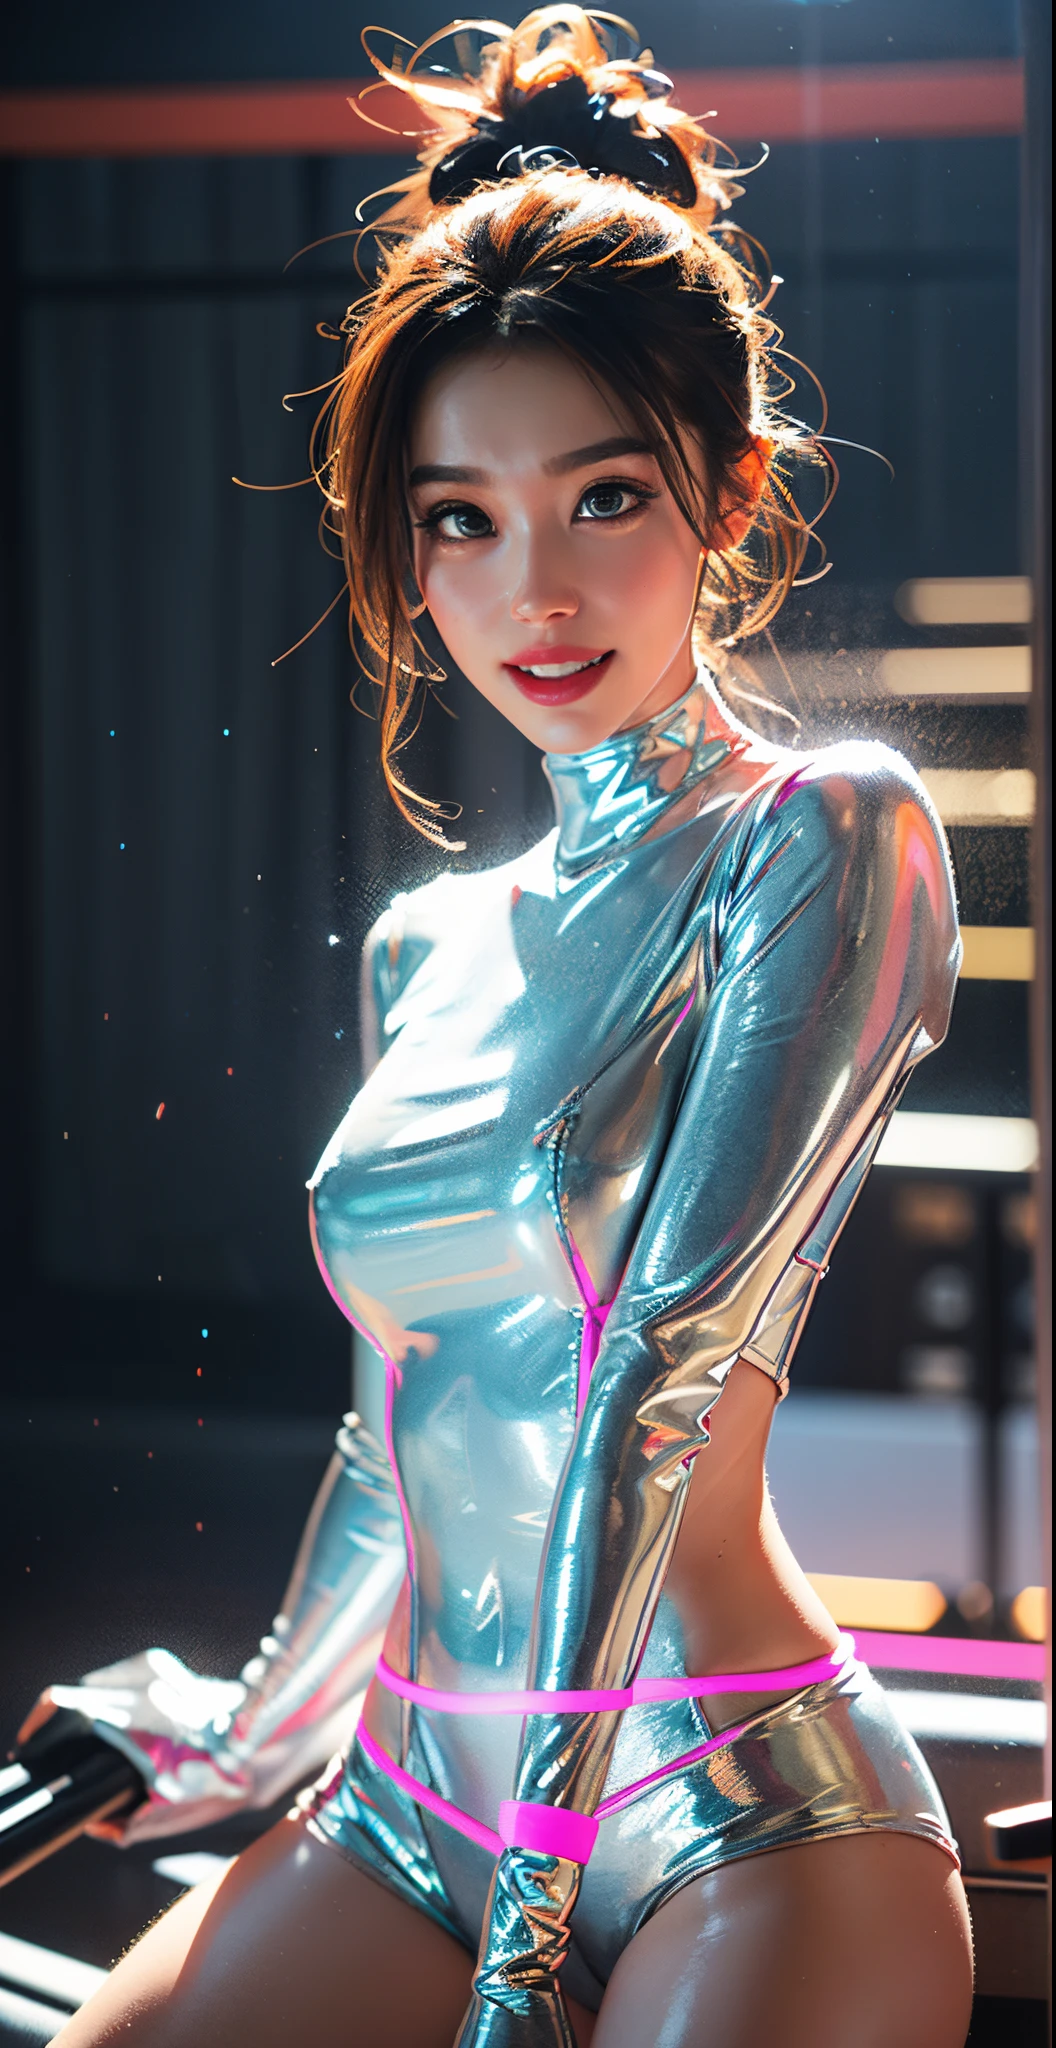 a glowing head made of glass and a glowing body made of glass, beautiful face, detail face, full body, long legs, nice smile, good arms and hands, pink neon glowing lights, amazing particles pulling out of the glass head and body, like droplets of glass floating, 8k highly detailed digital art, intricate artwork, octane render, mind-bending digital art, breathtaking digital art, 3d digital art, 8k hd wallpaper, volumetric lighting, highly reflective glass particles